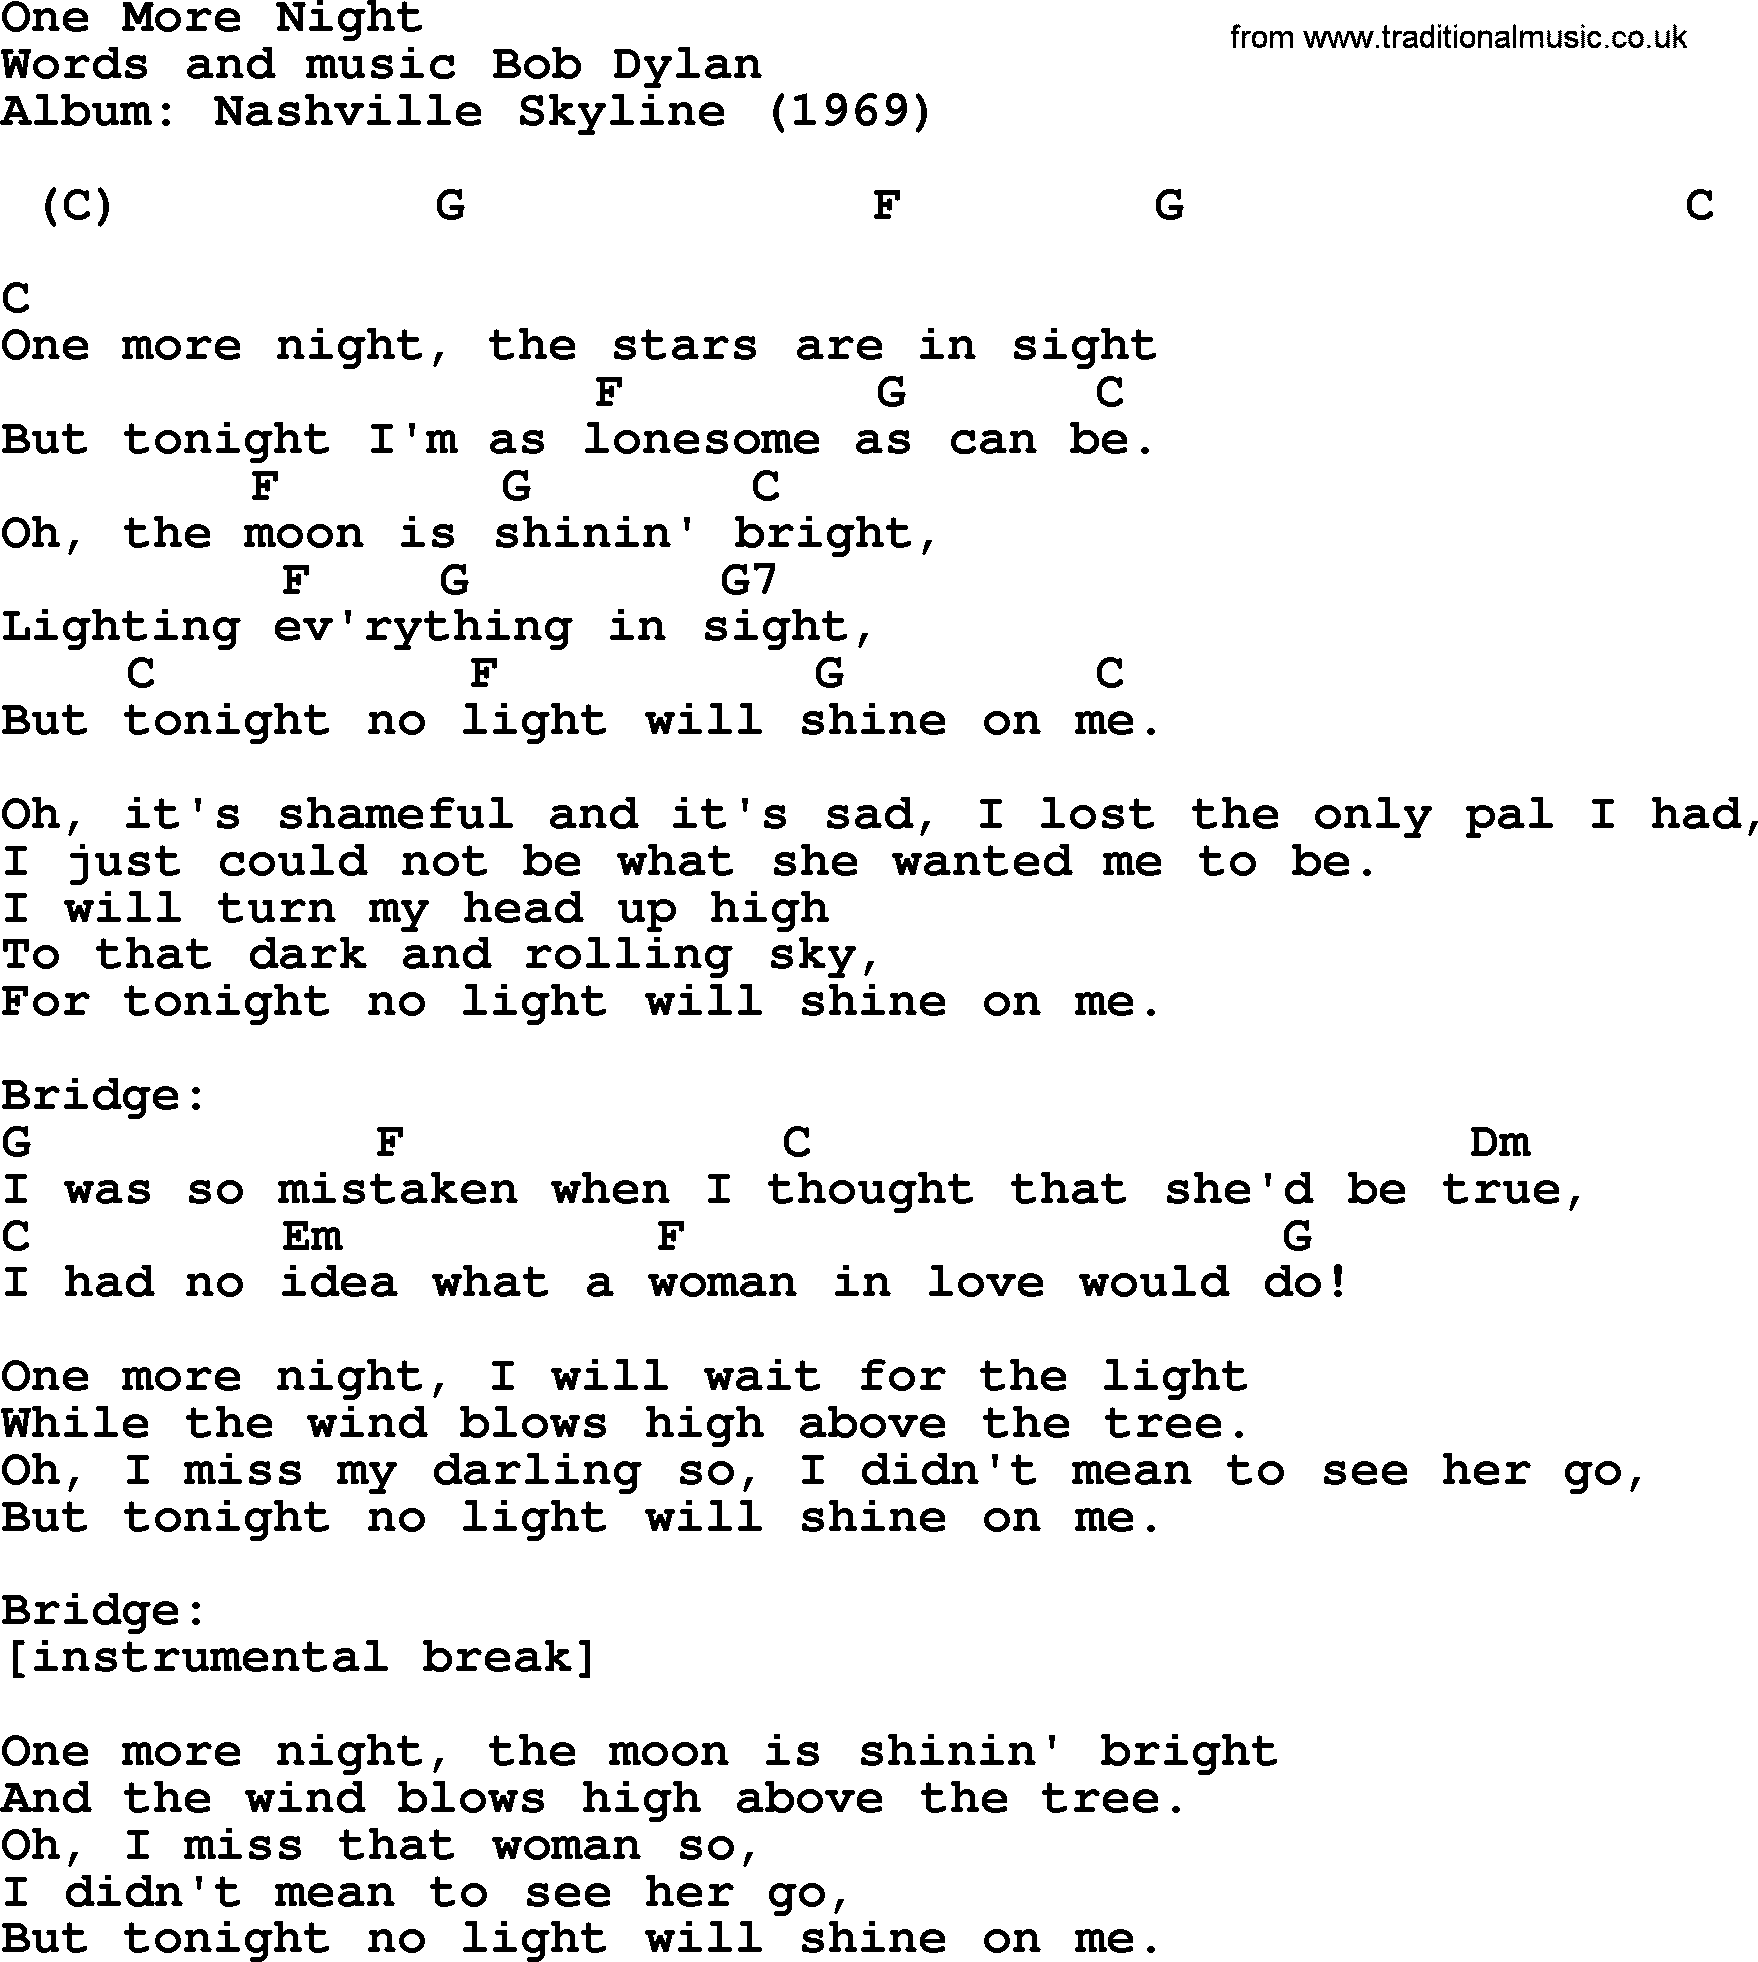 Bob Dylan song, lyrics with chords - One More Night